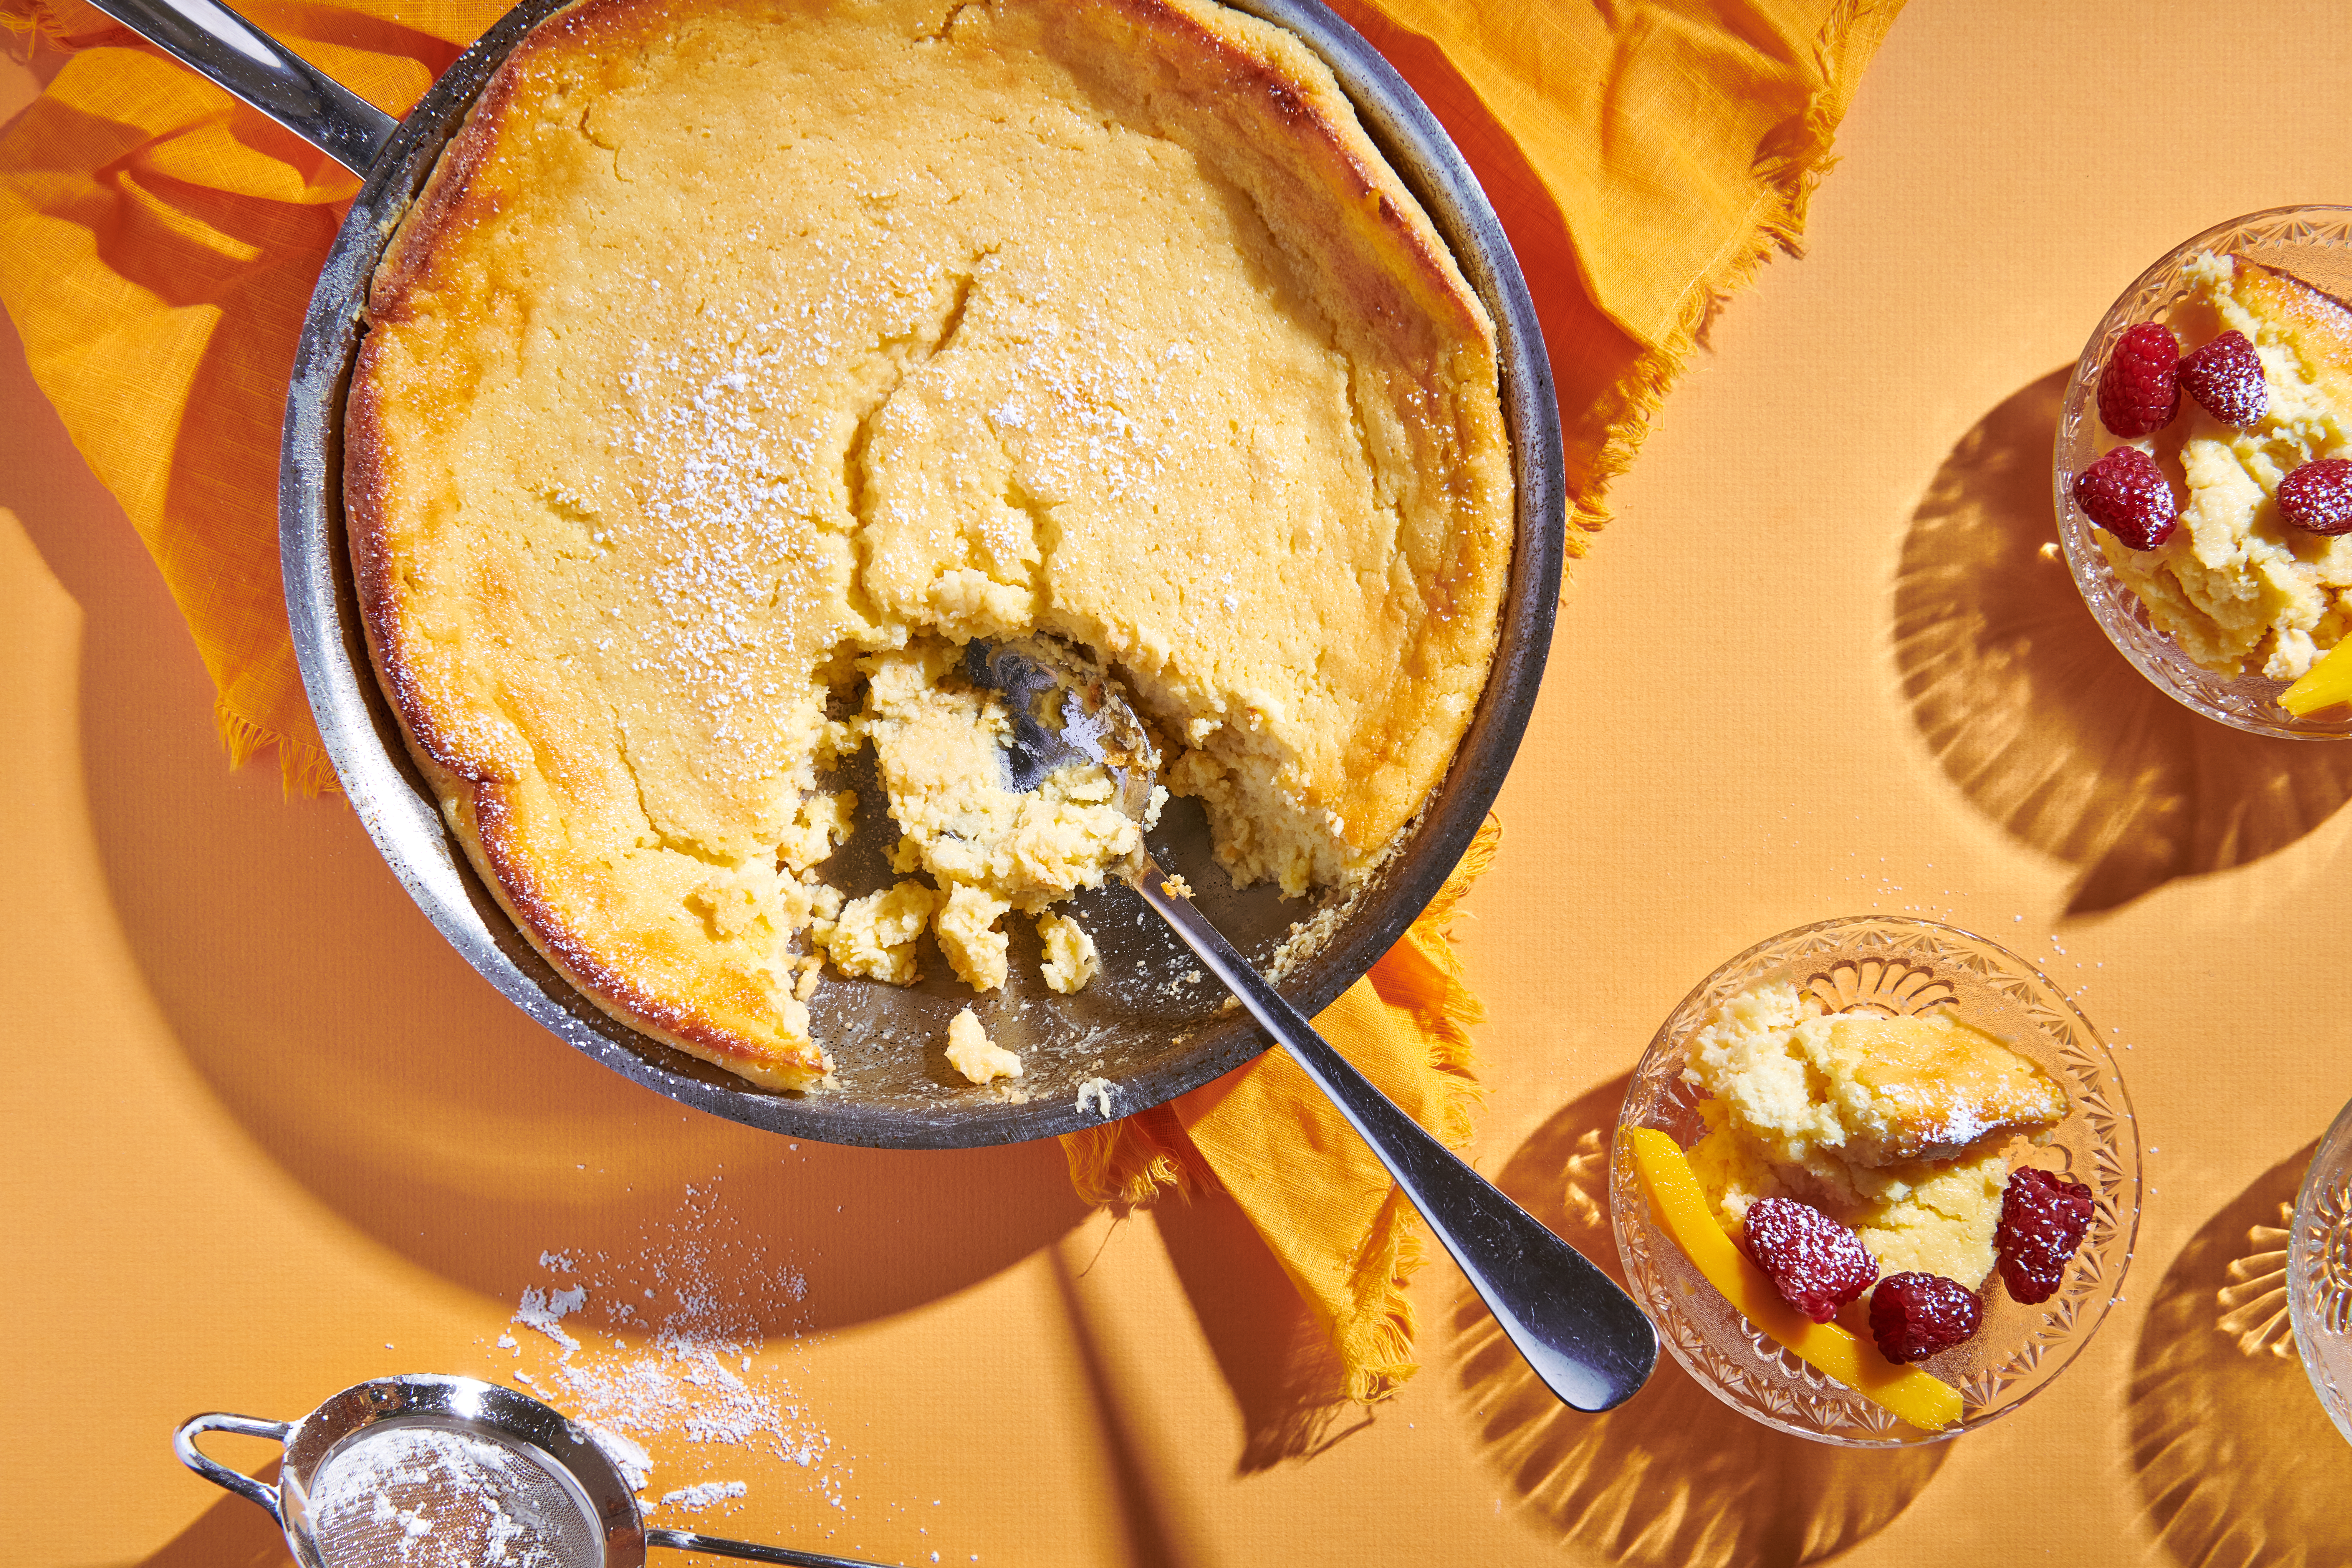 Mango pudding cake served in the skillet alongside two bowls of cake garnished with fresh berries.